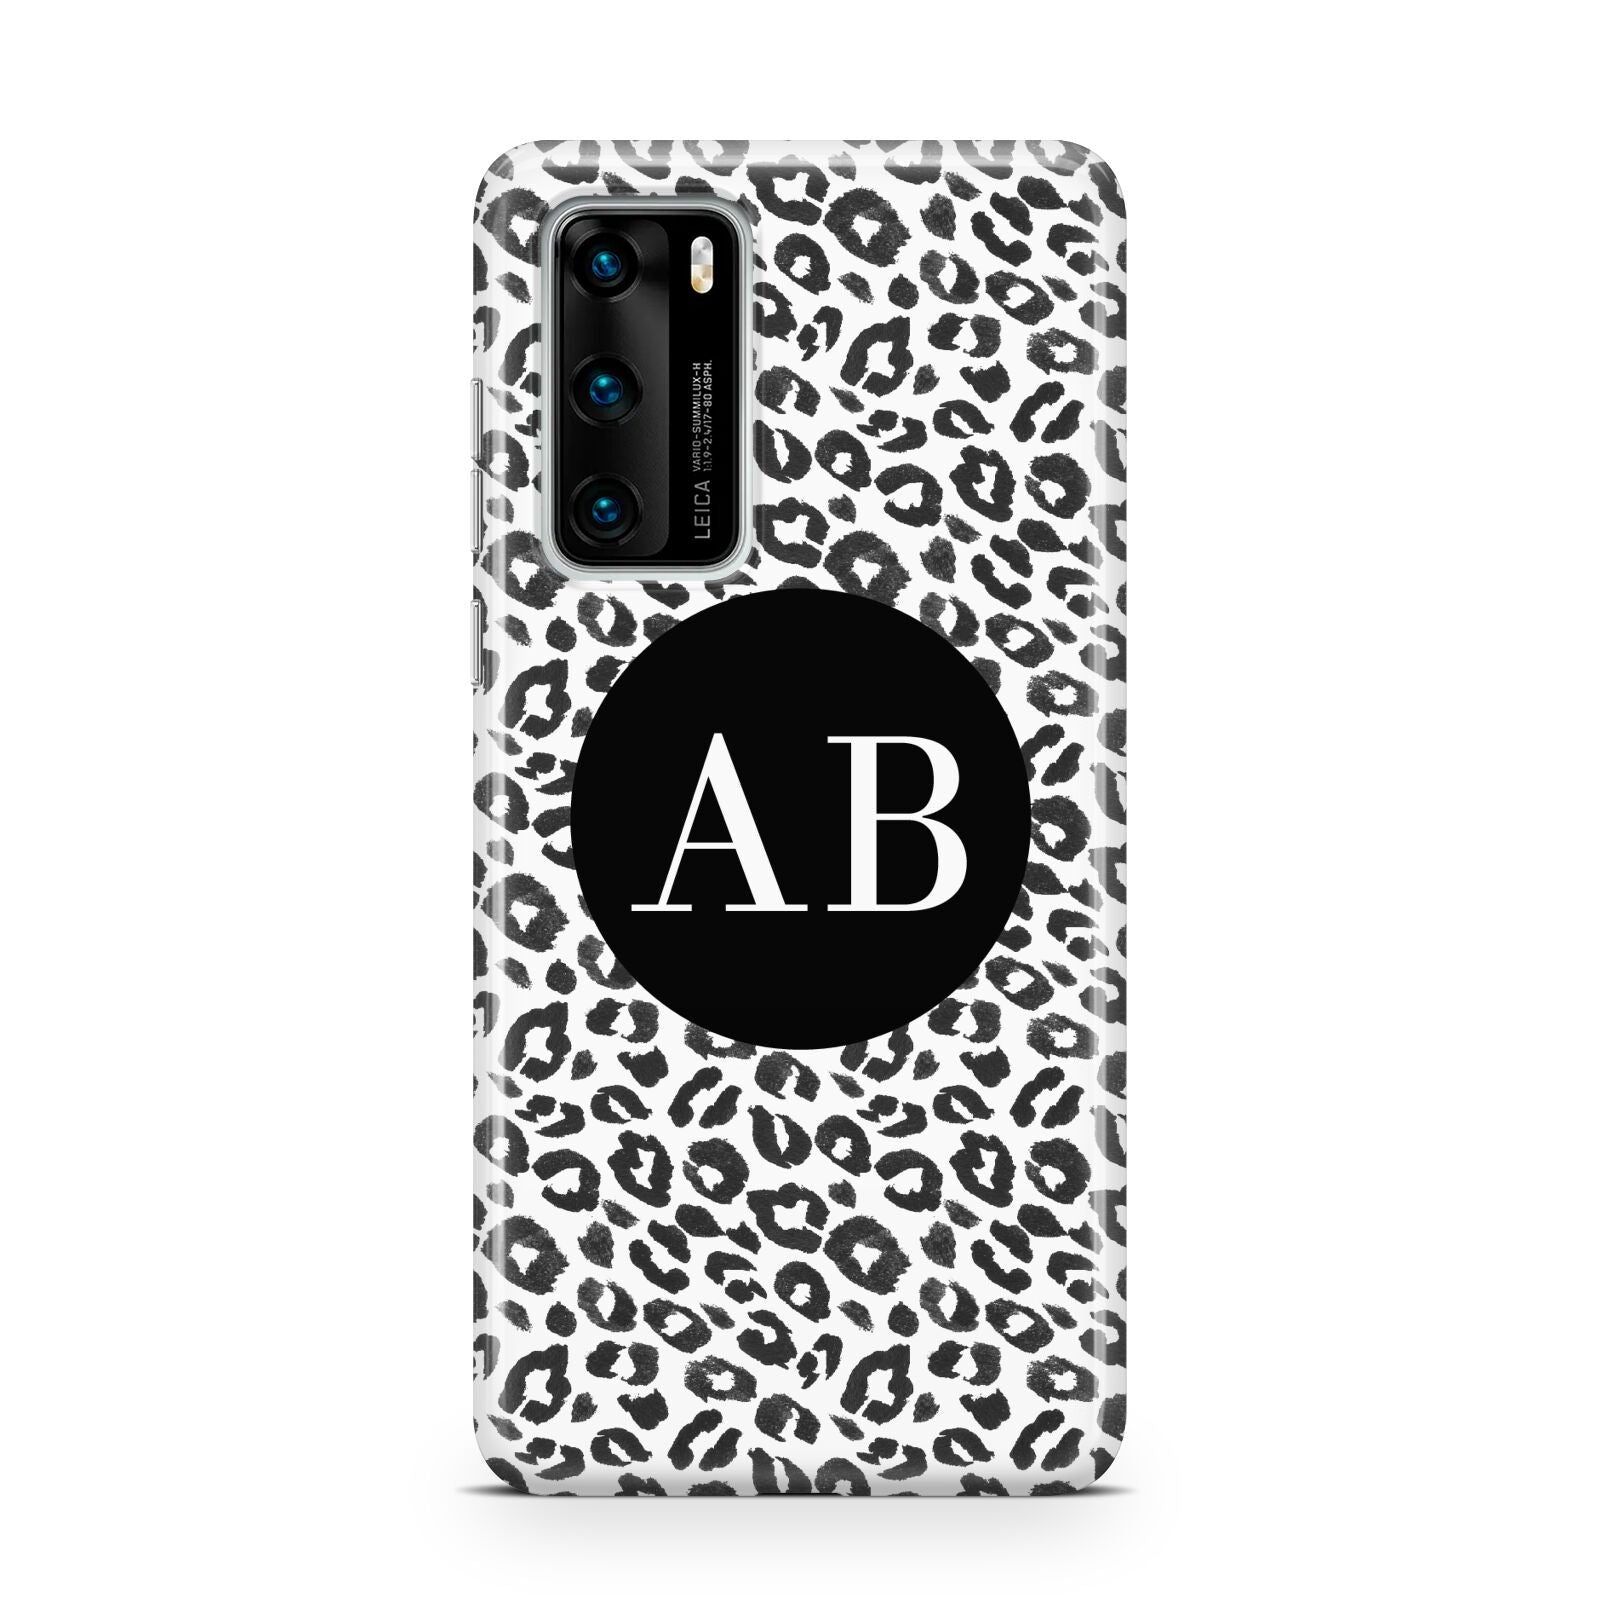 Leopard Print Black and White Huawei P40 Phone Case